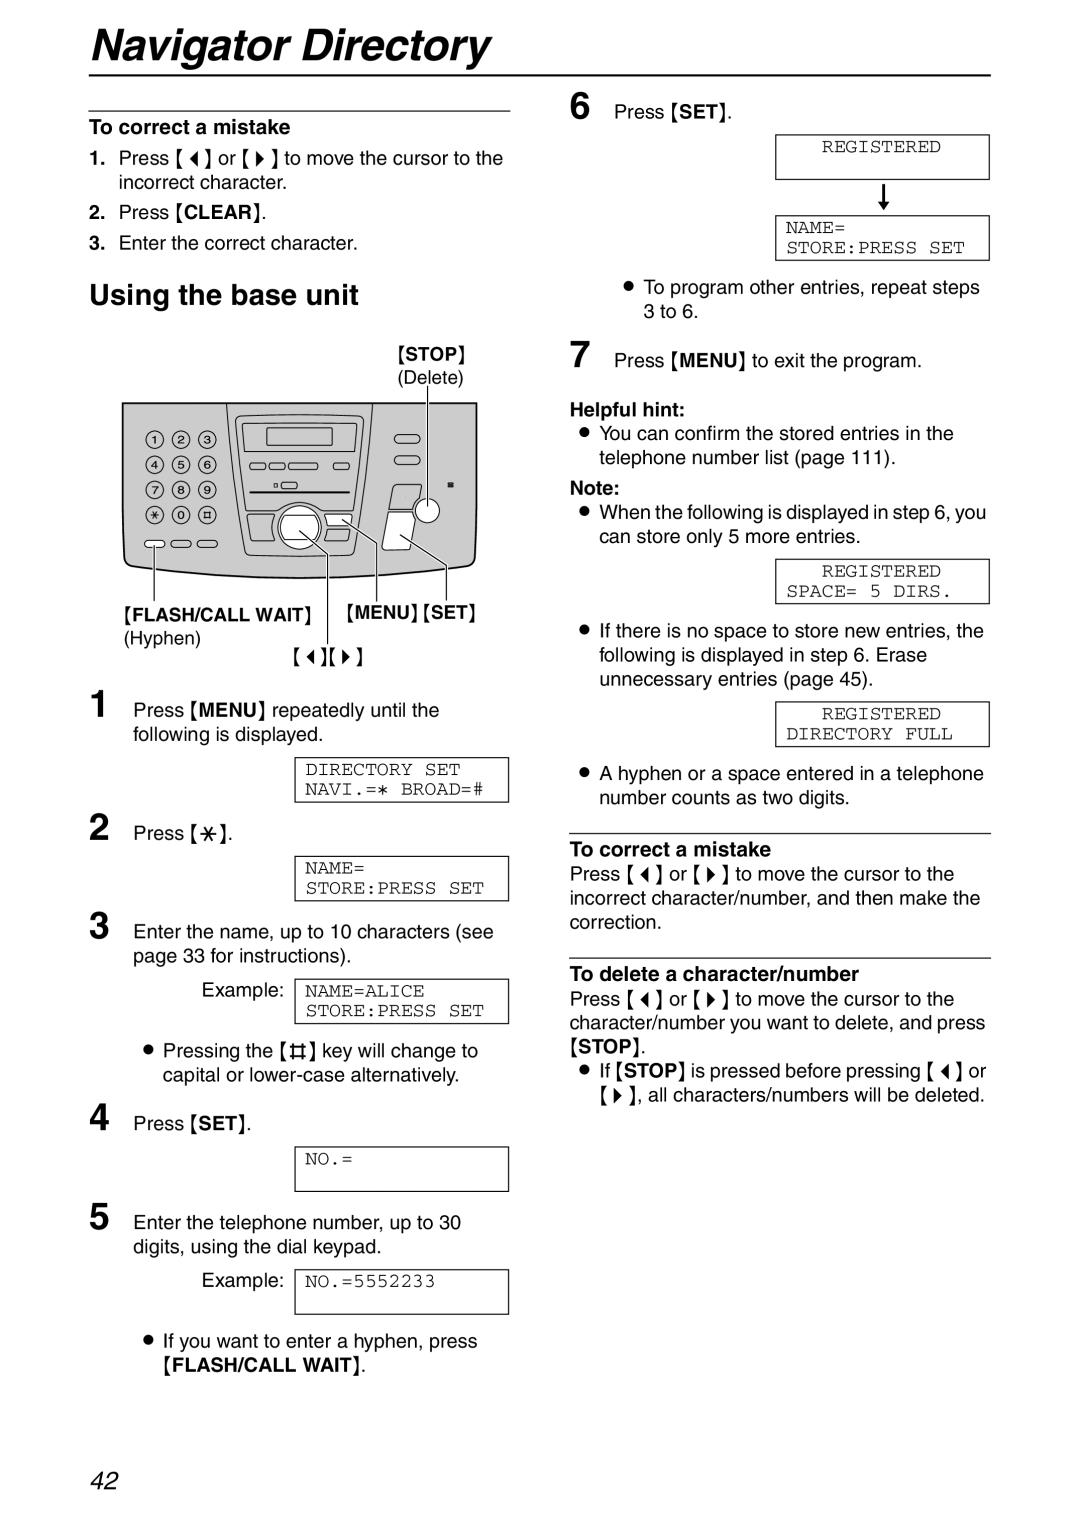 Panasonic KX-FPG371 manual Using the base unit, Press Menu repeatedly until the following is displayed 